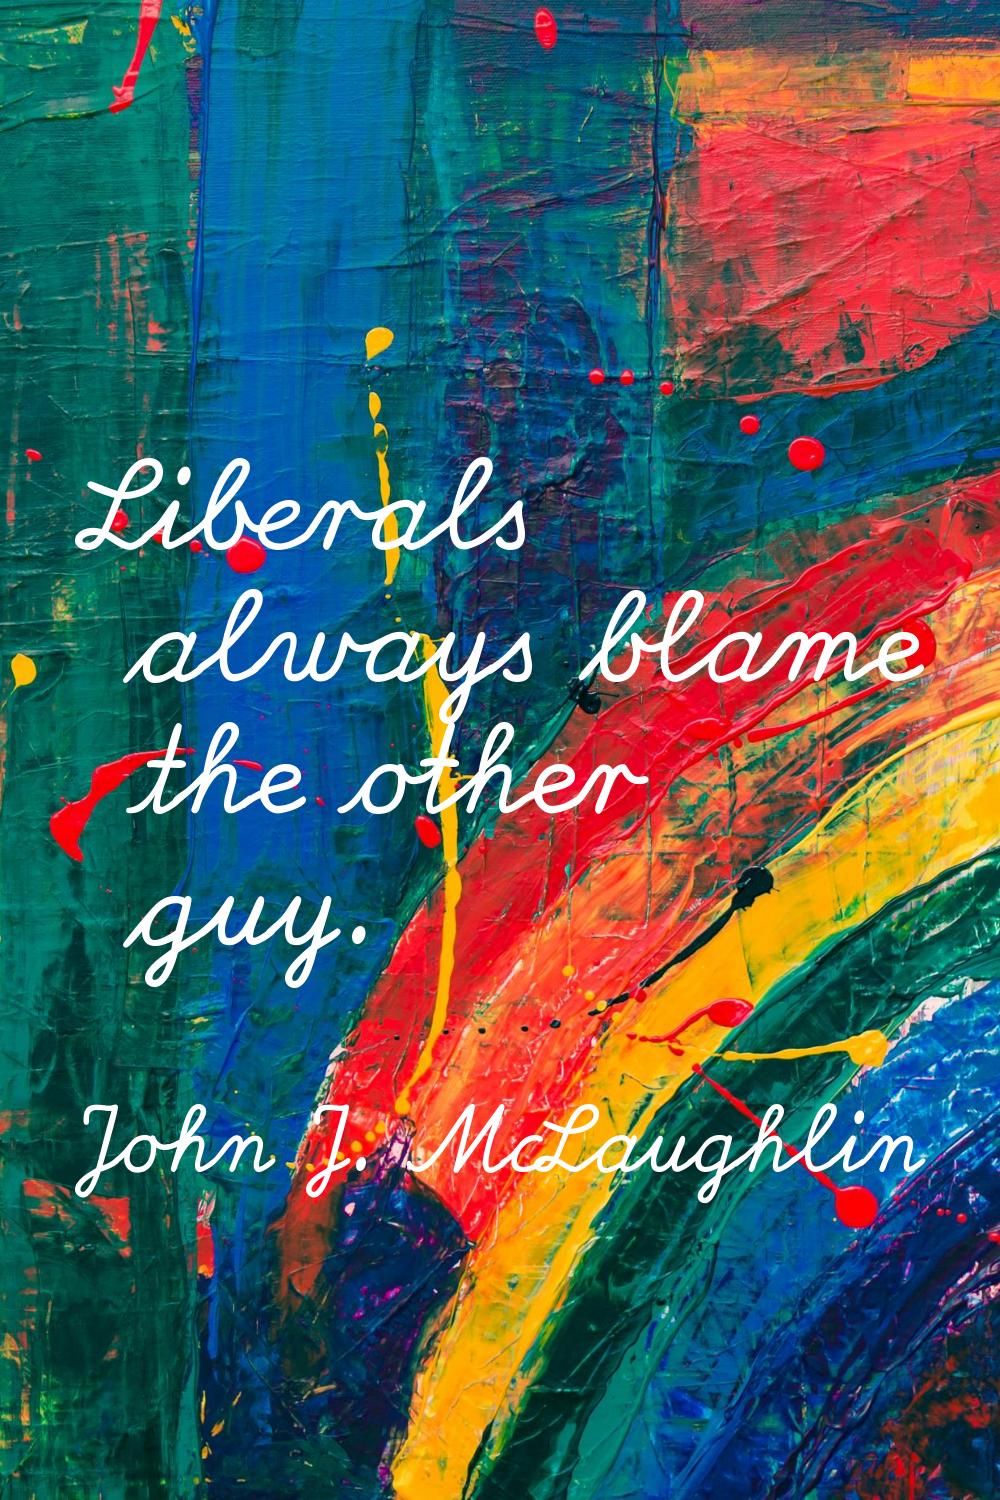 Liberals always blame the other guy.